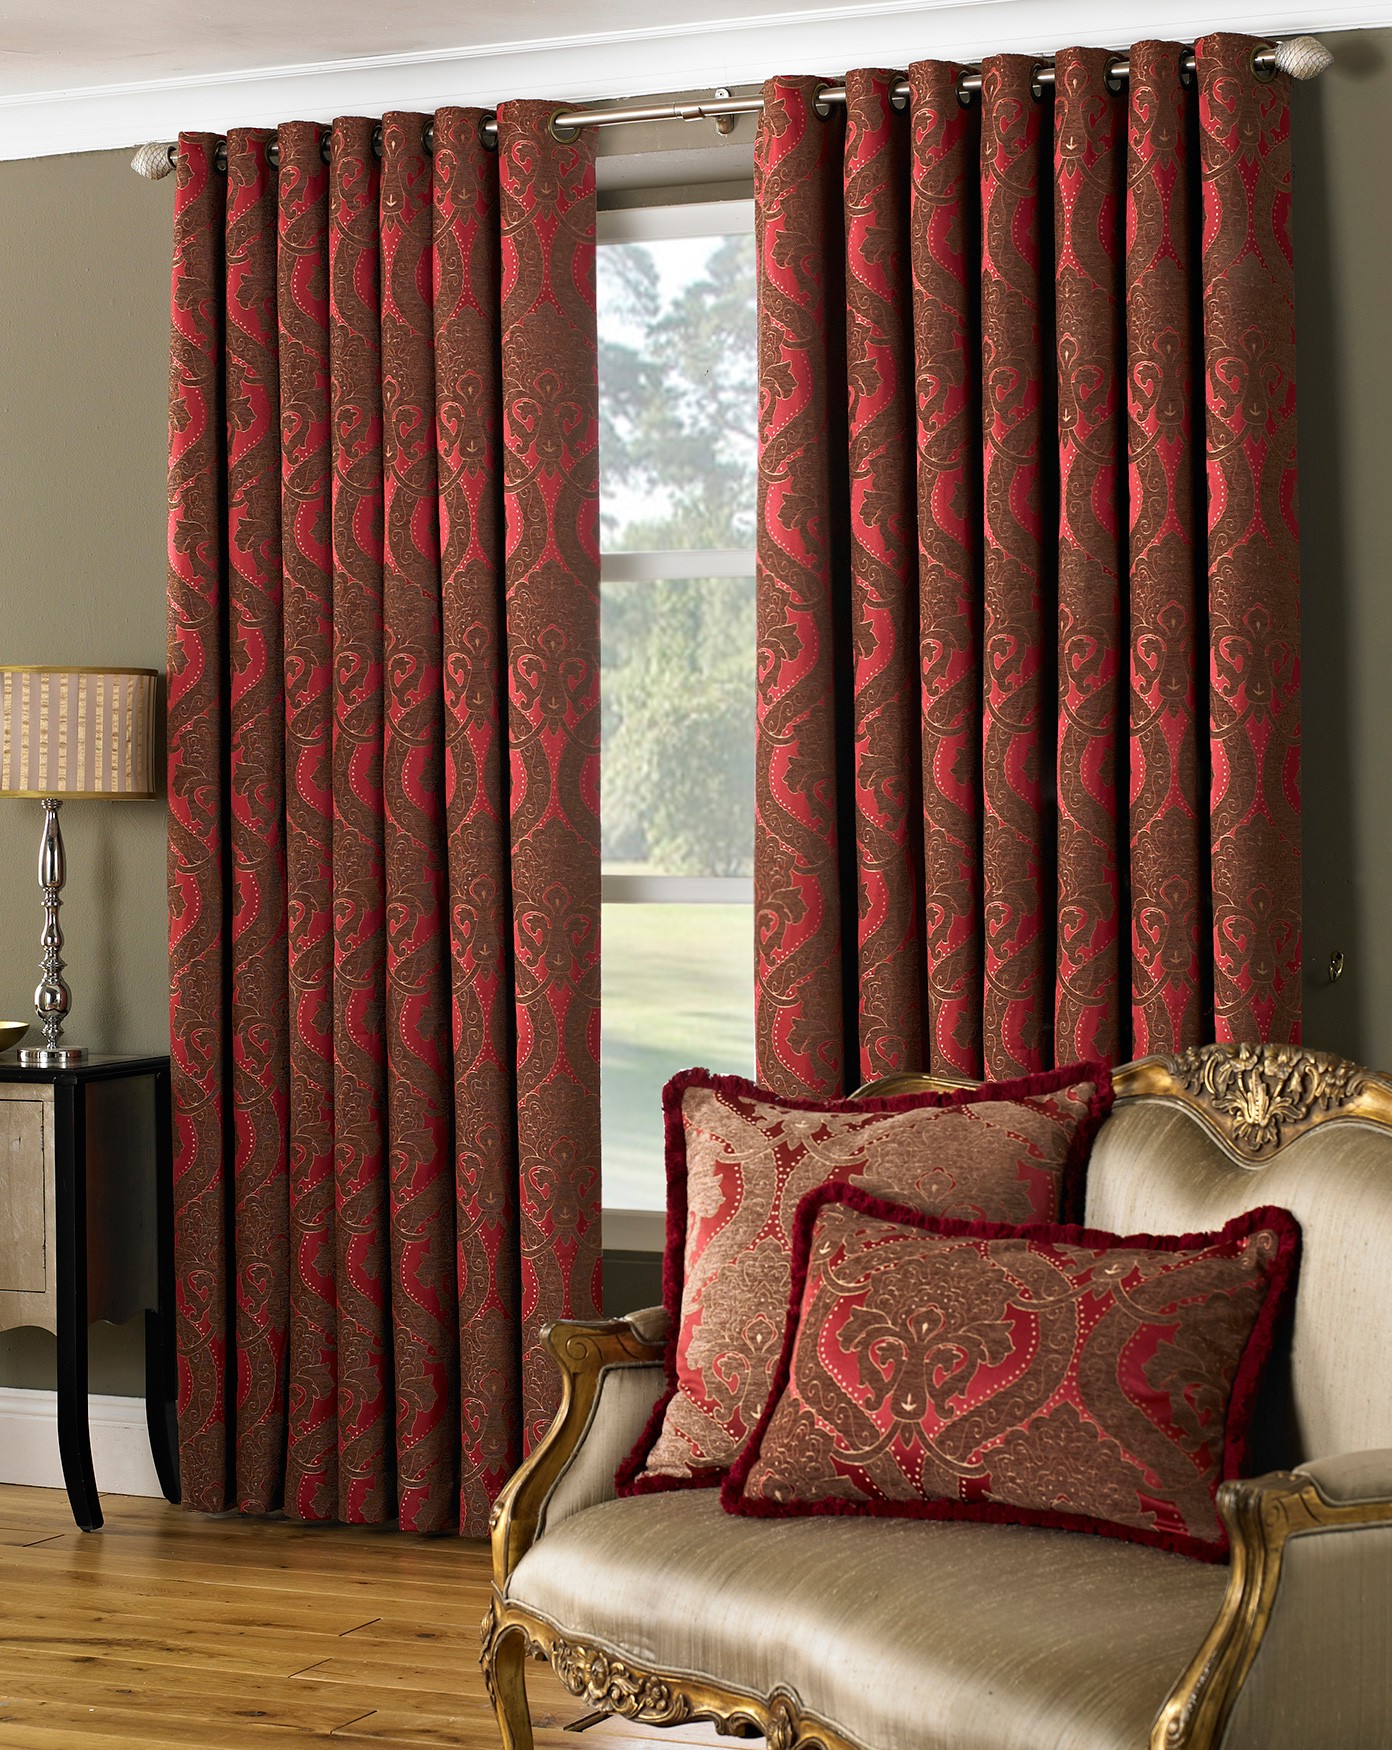 Amazing Good Living Room Curtain Color Ideas Vermont | 4 Home Decorations